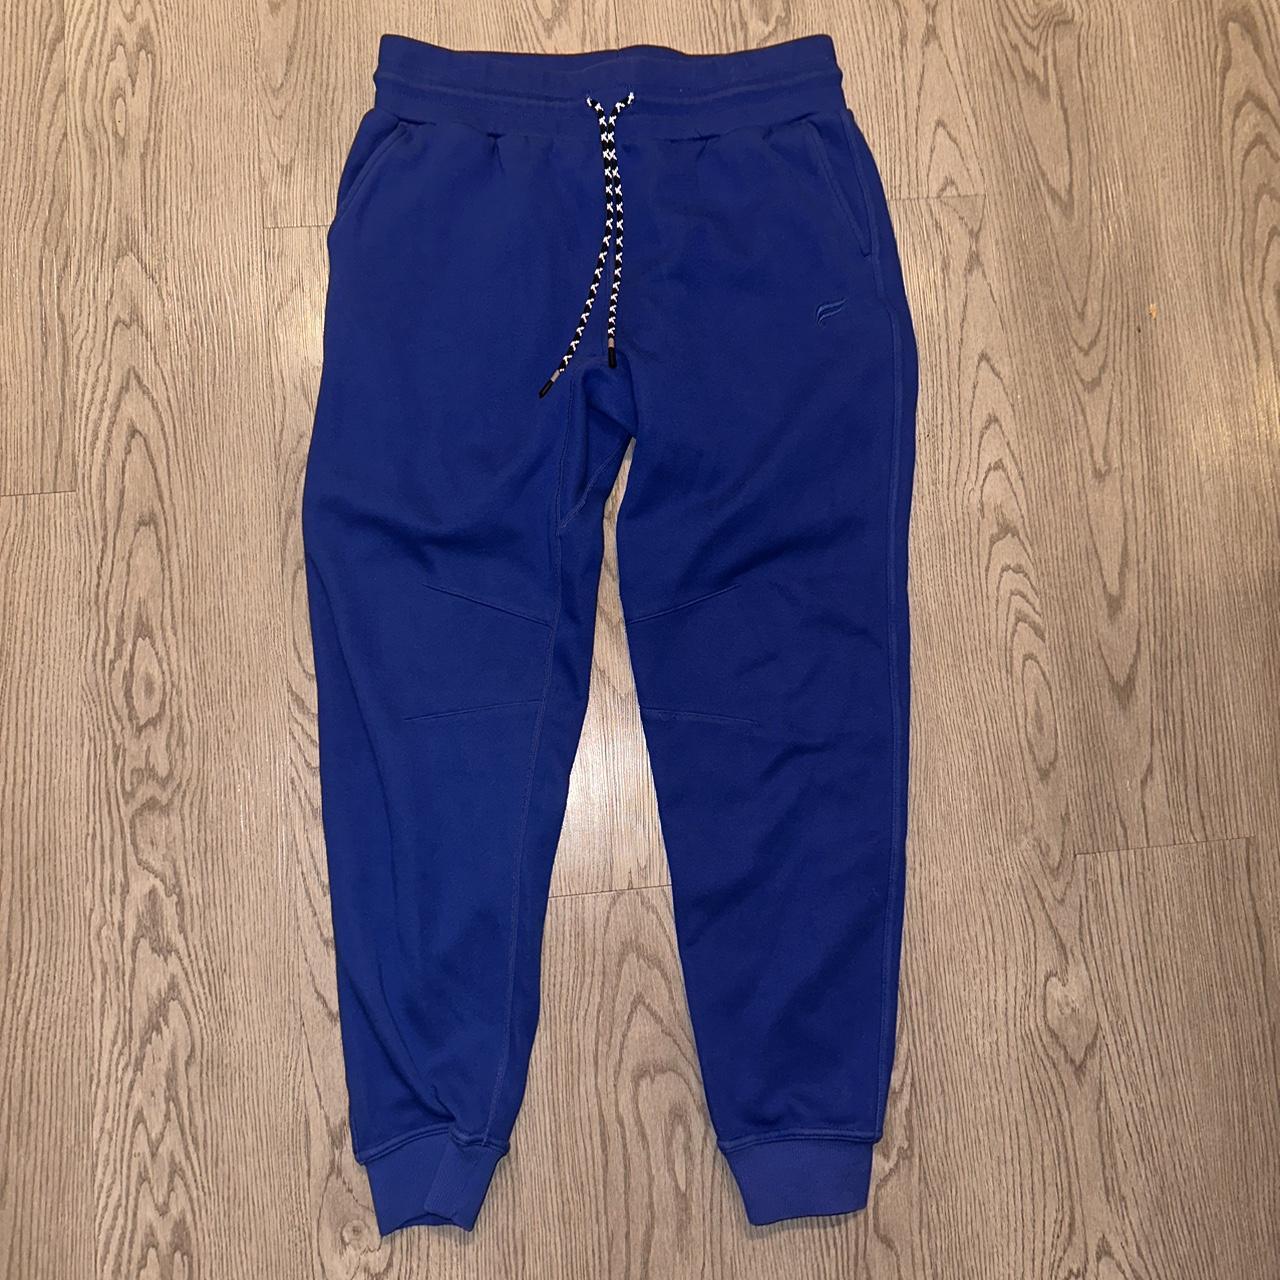 Blue Fabletics sweat pant joggers No stains or holes - Depop